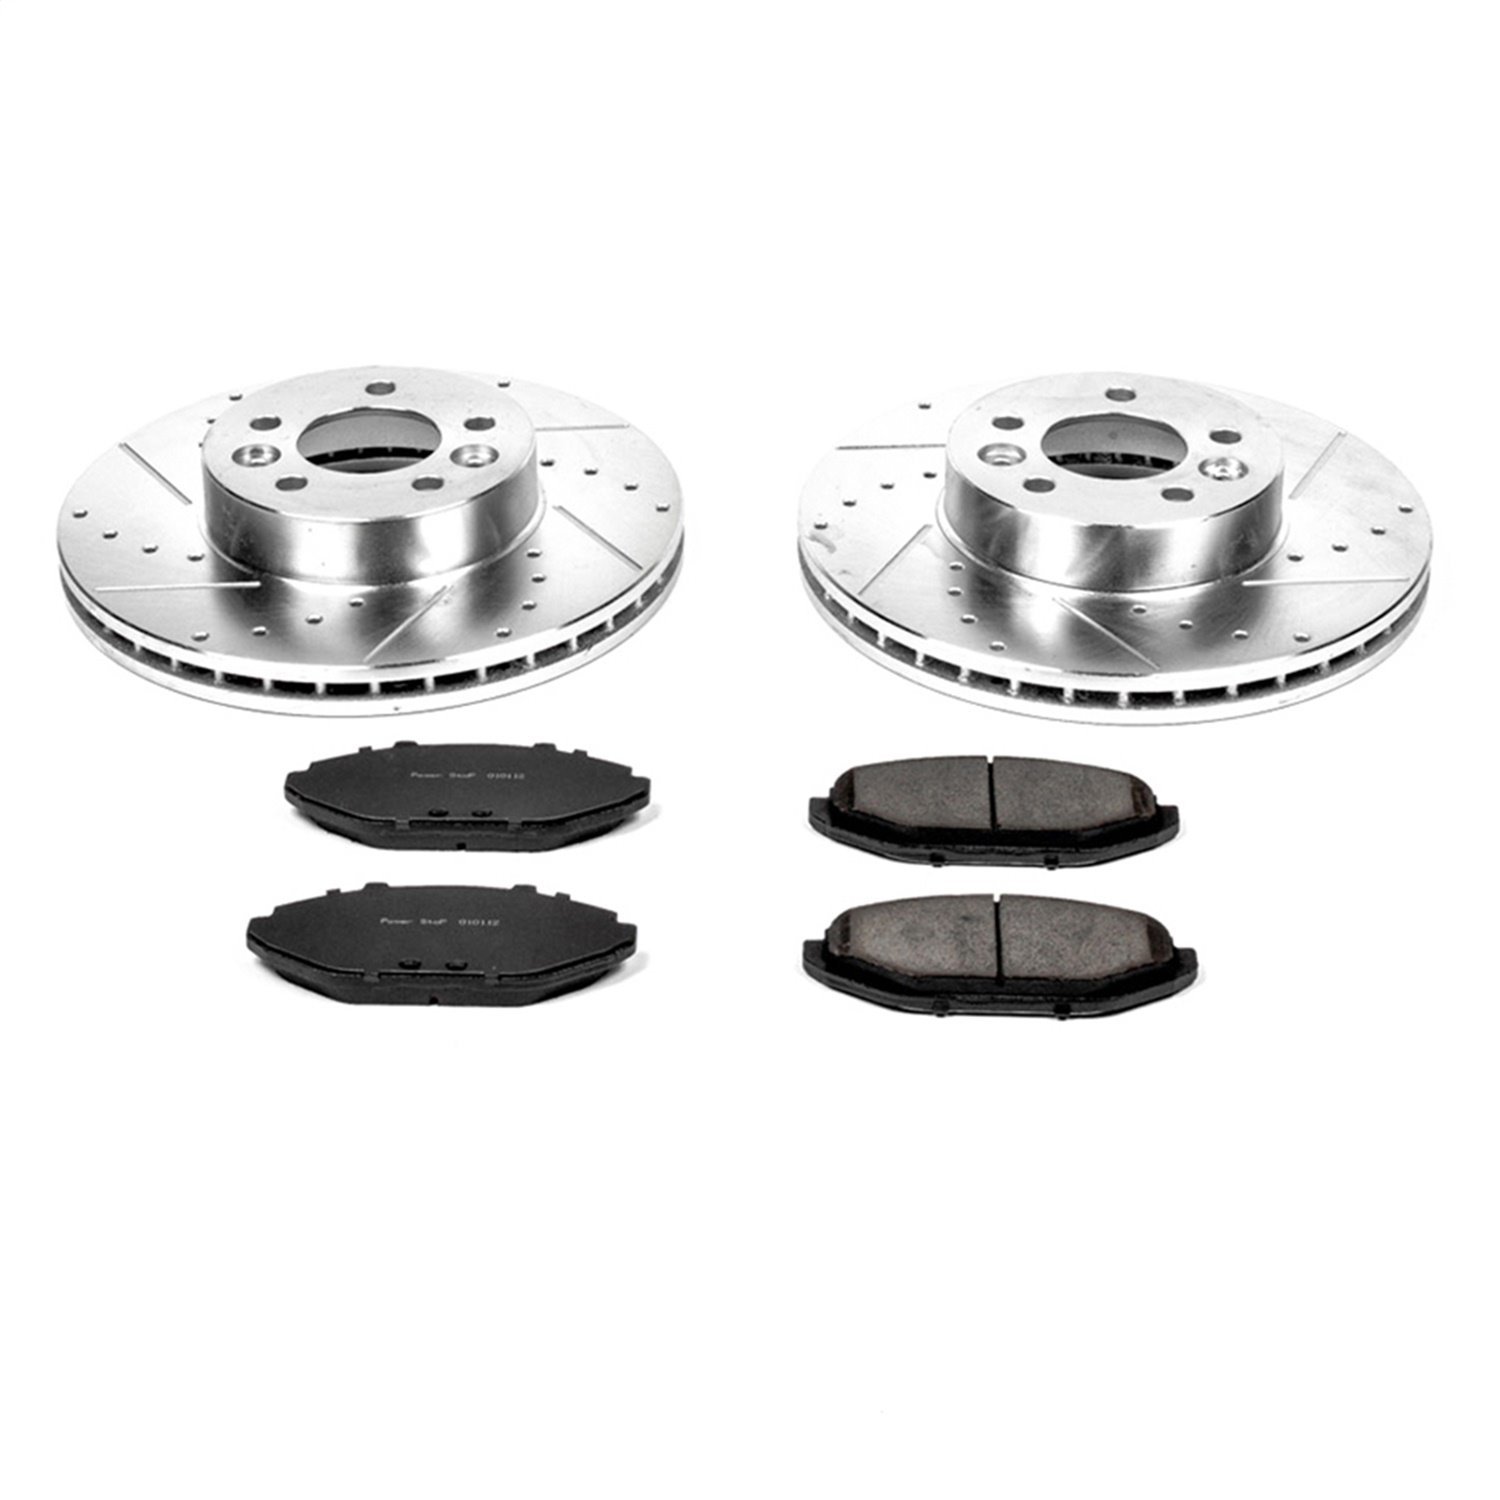 Z23 Evolution Brake Kit for Lincoln Town Car, Ford Crown Victoria and more